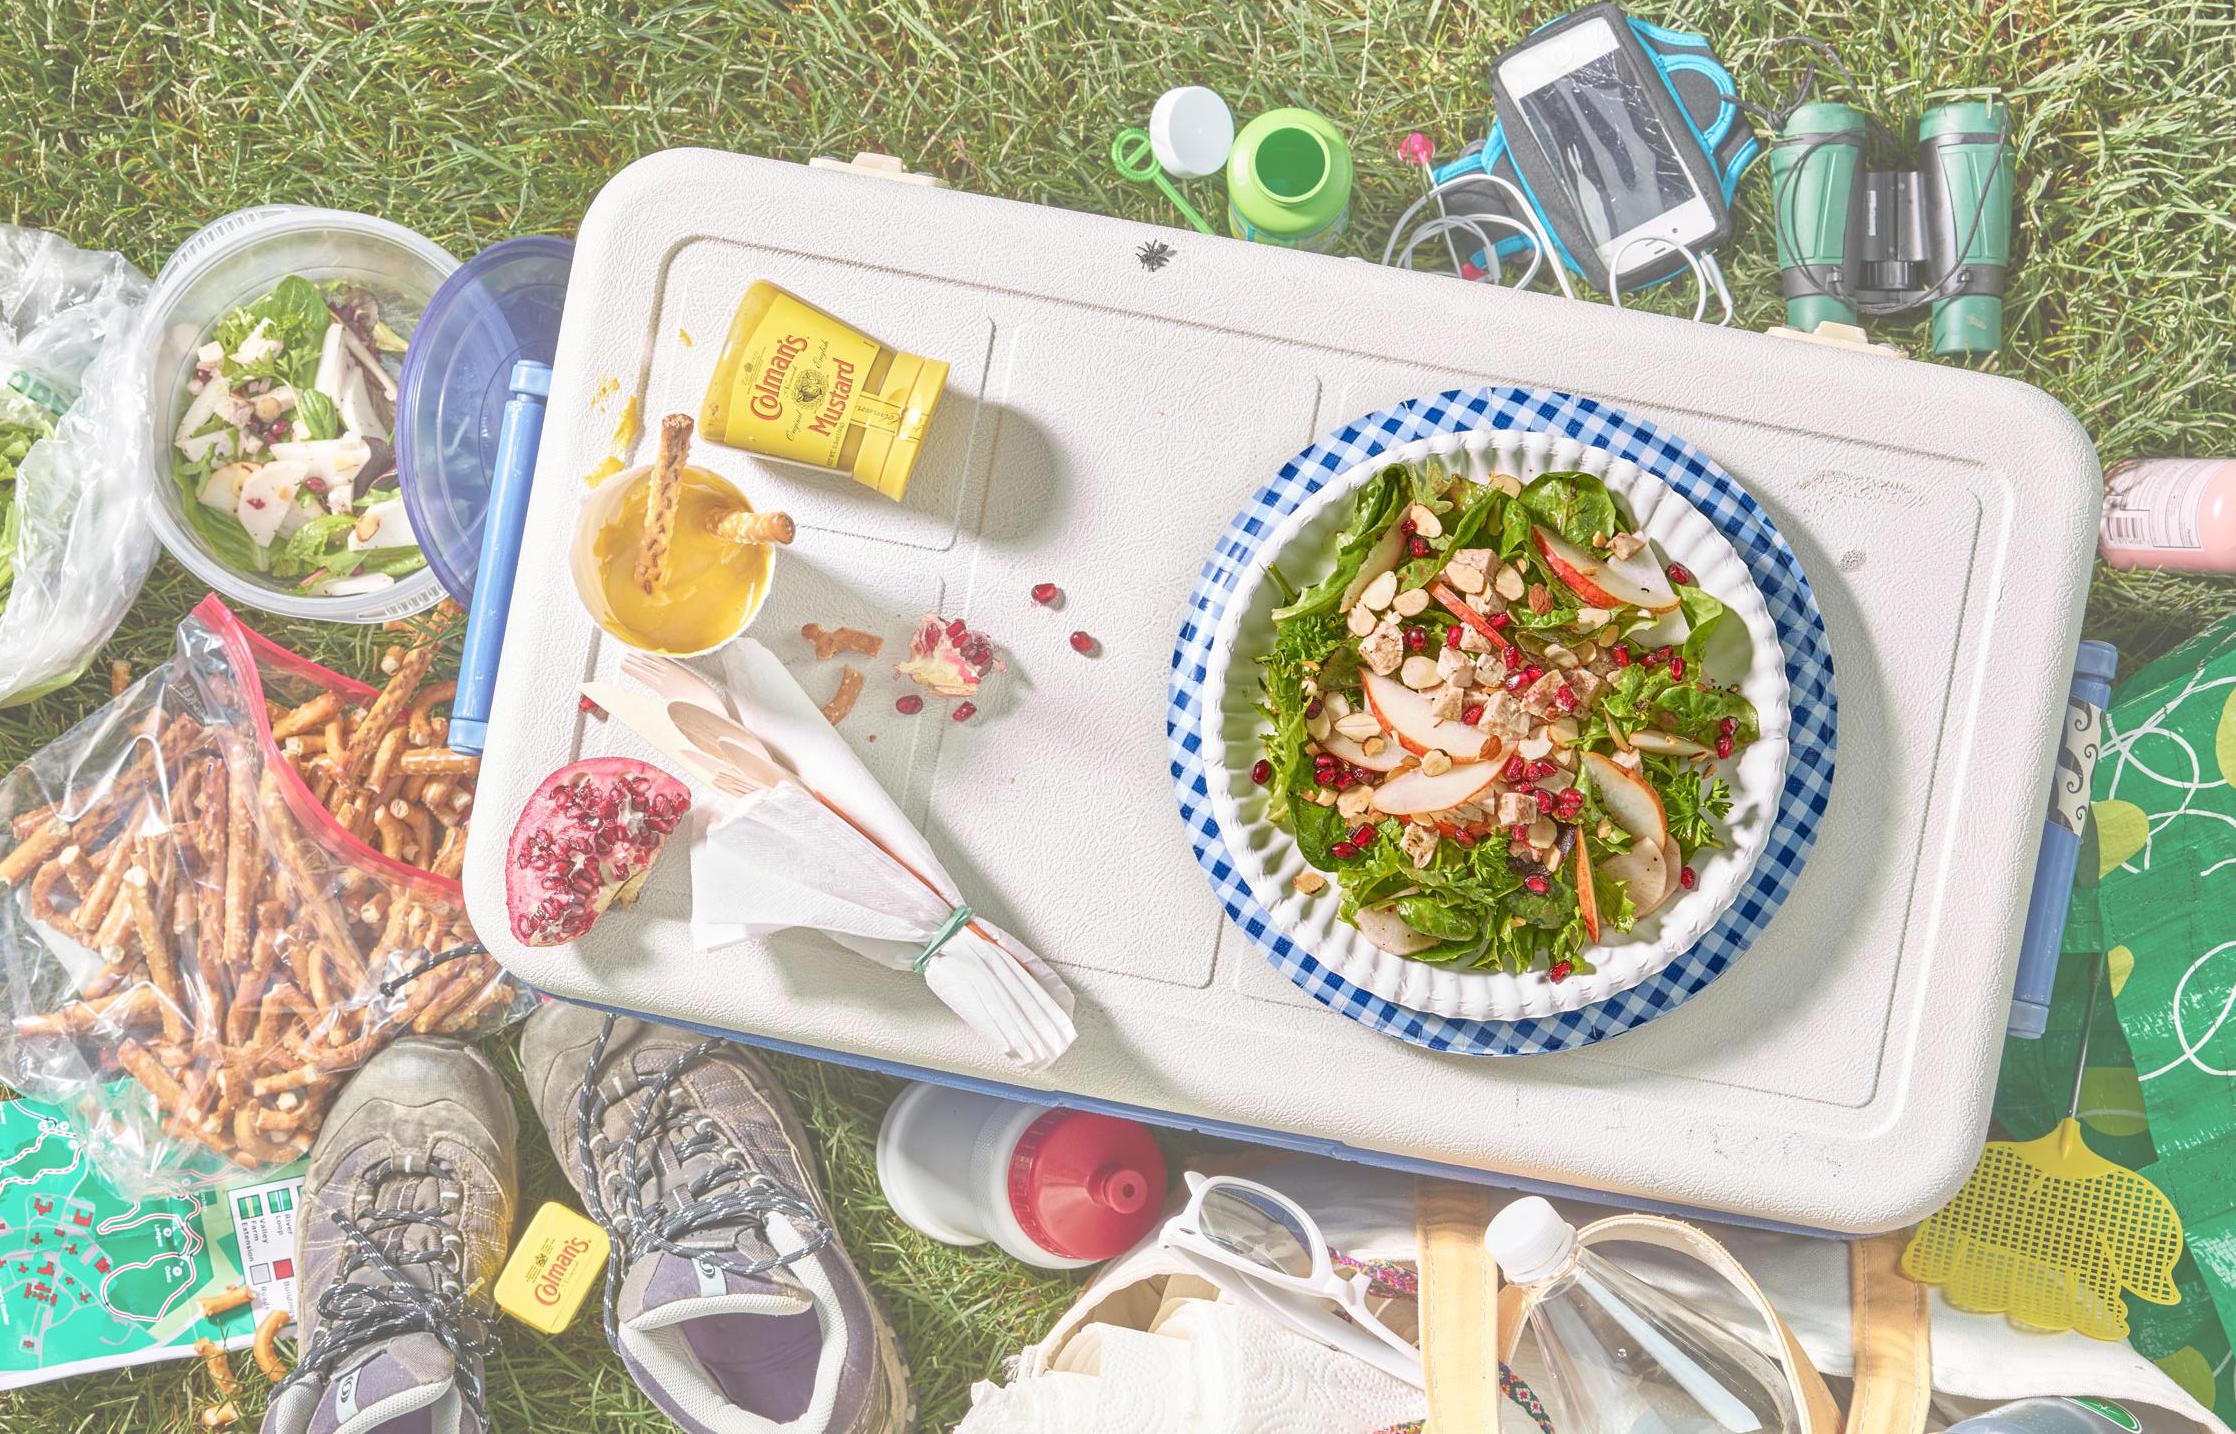 chicken salad in a bowl as a centerpiece on a picnic blanket in the grass